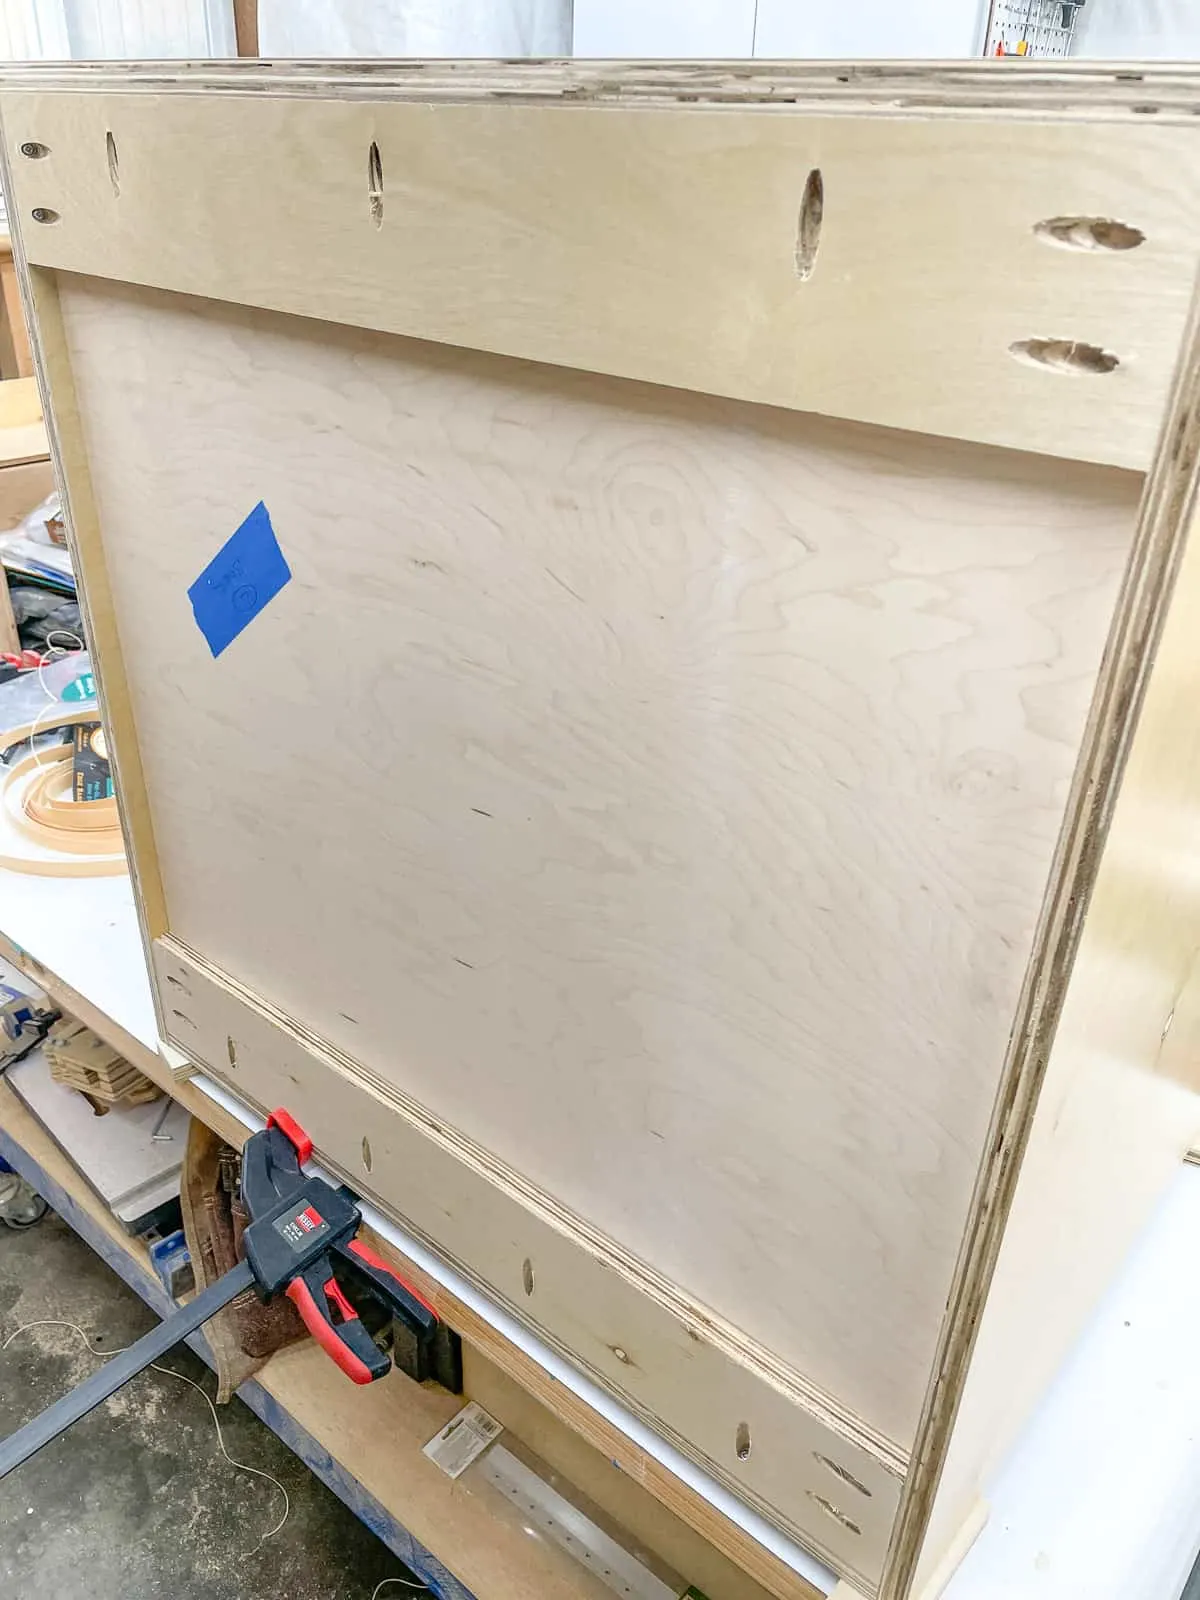 nailer strips on the back of the cabinet box